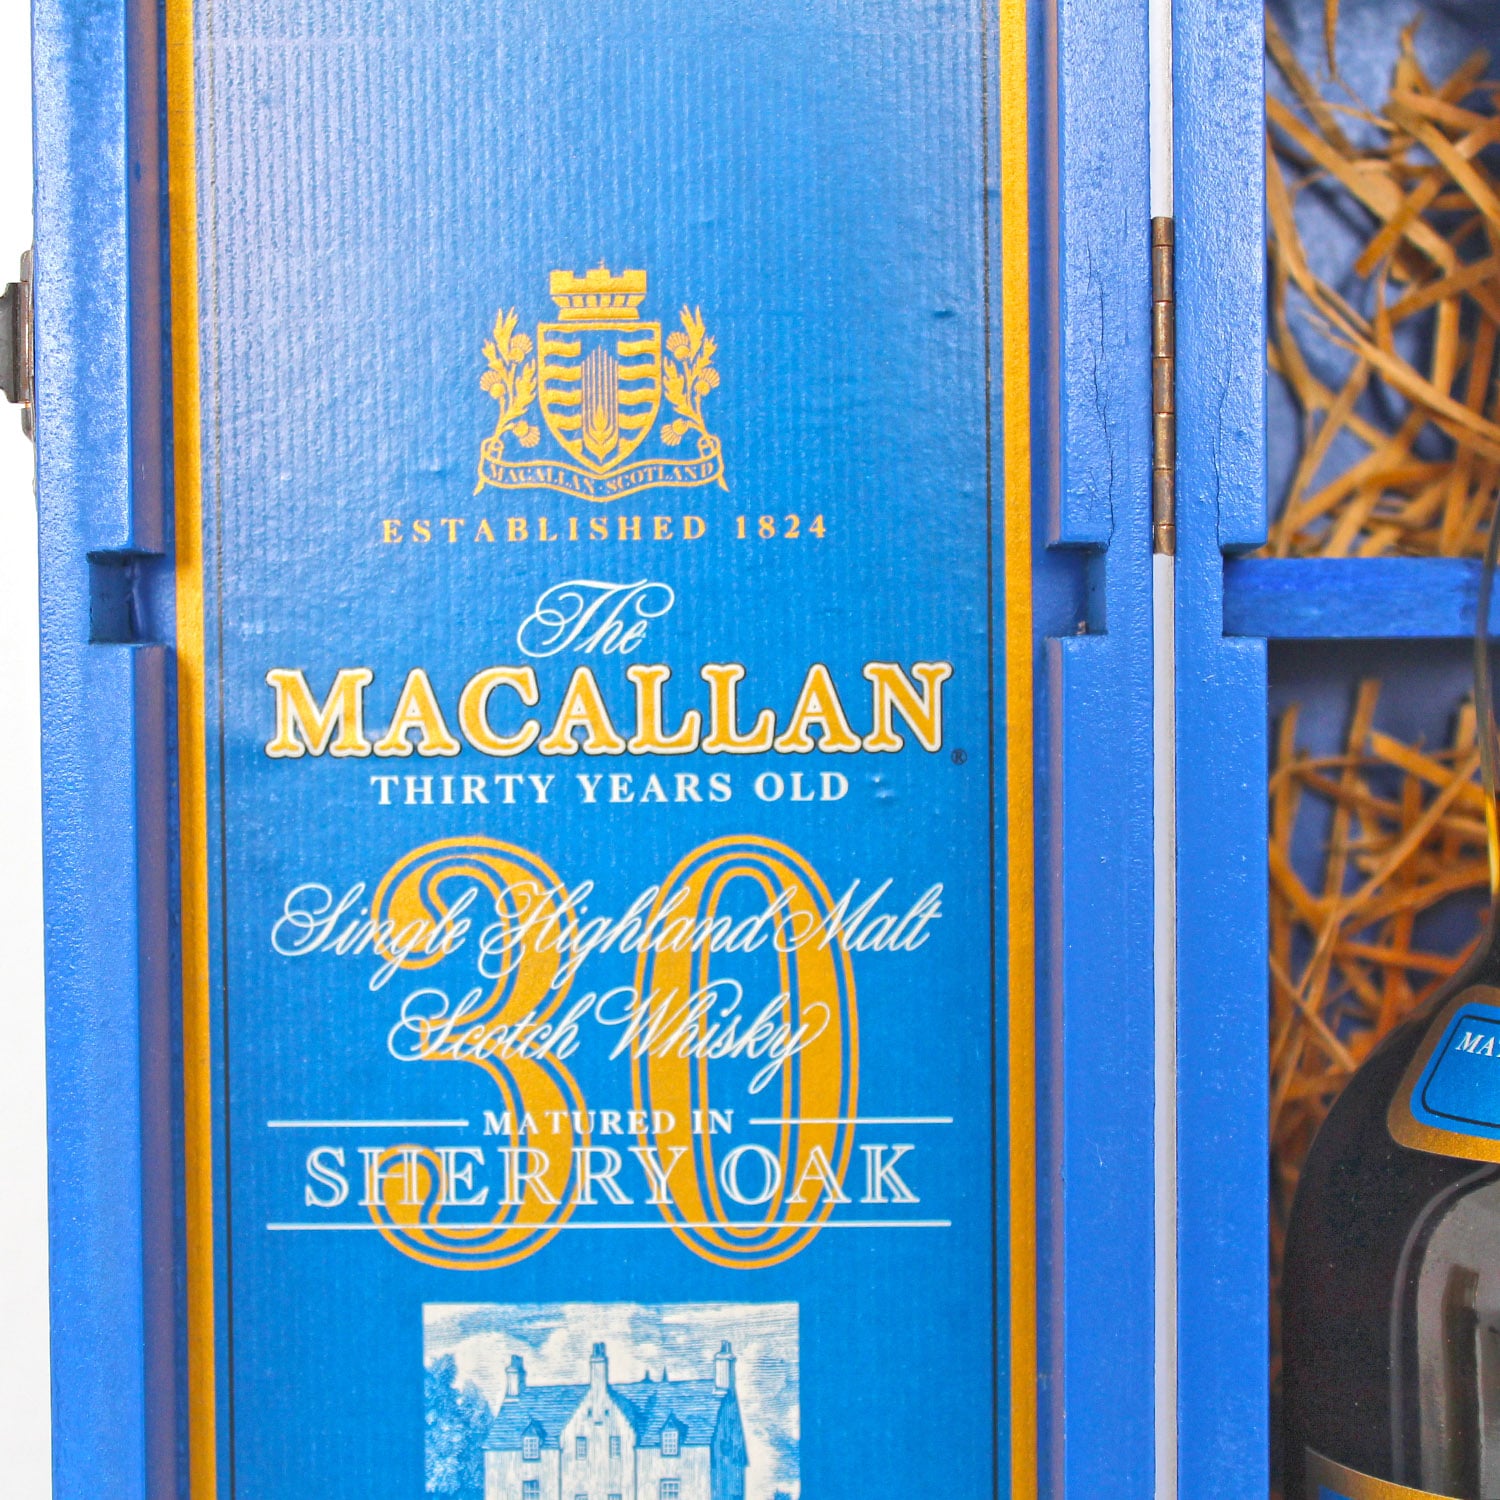 Macallan 30 Years Old Blue Box Label